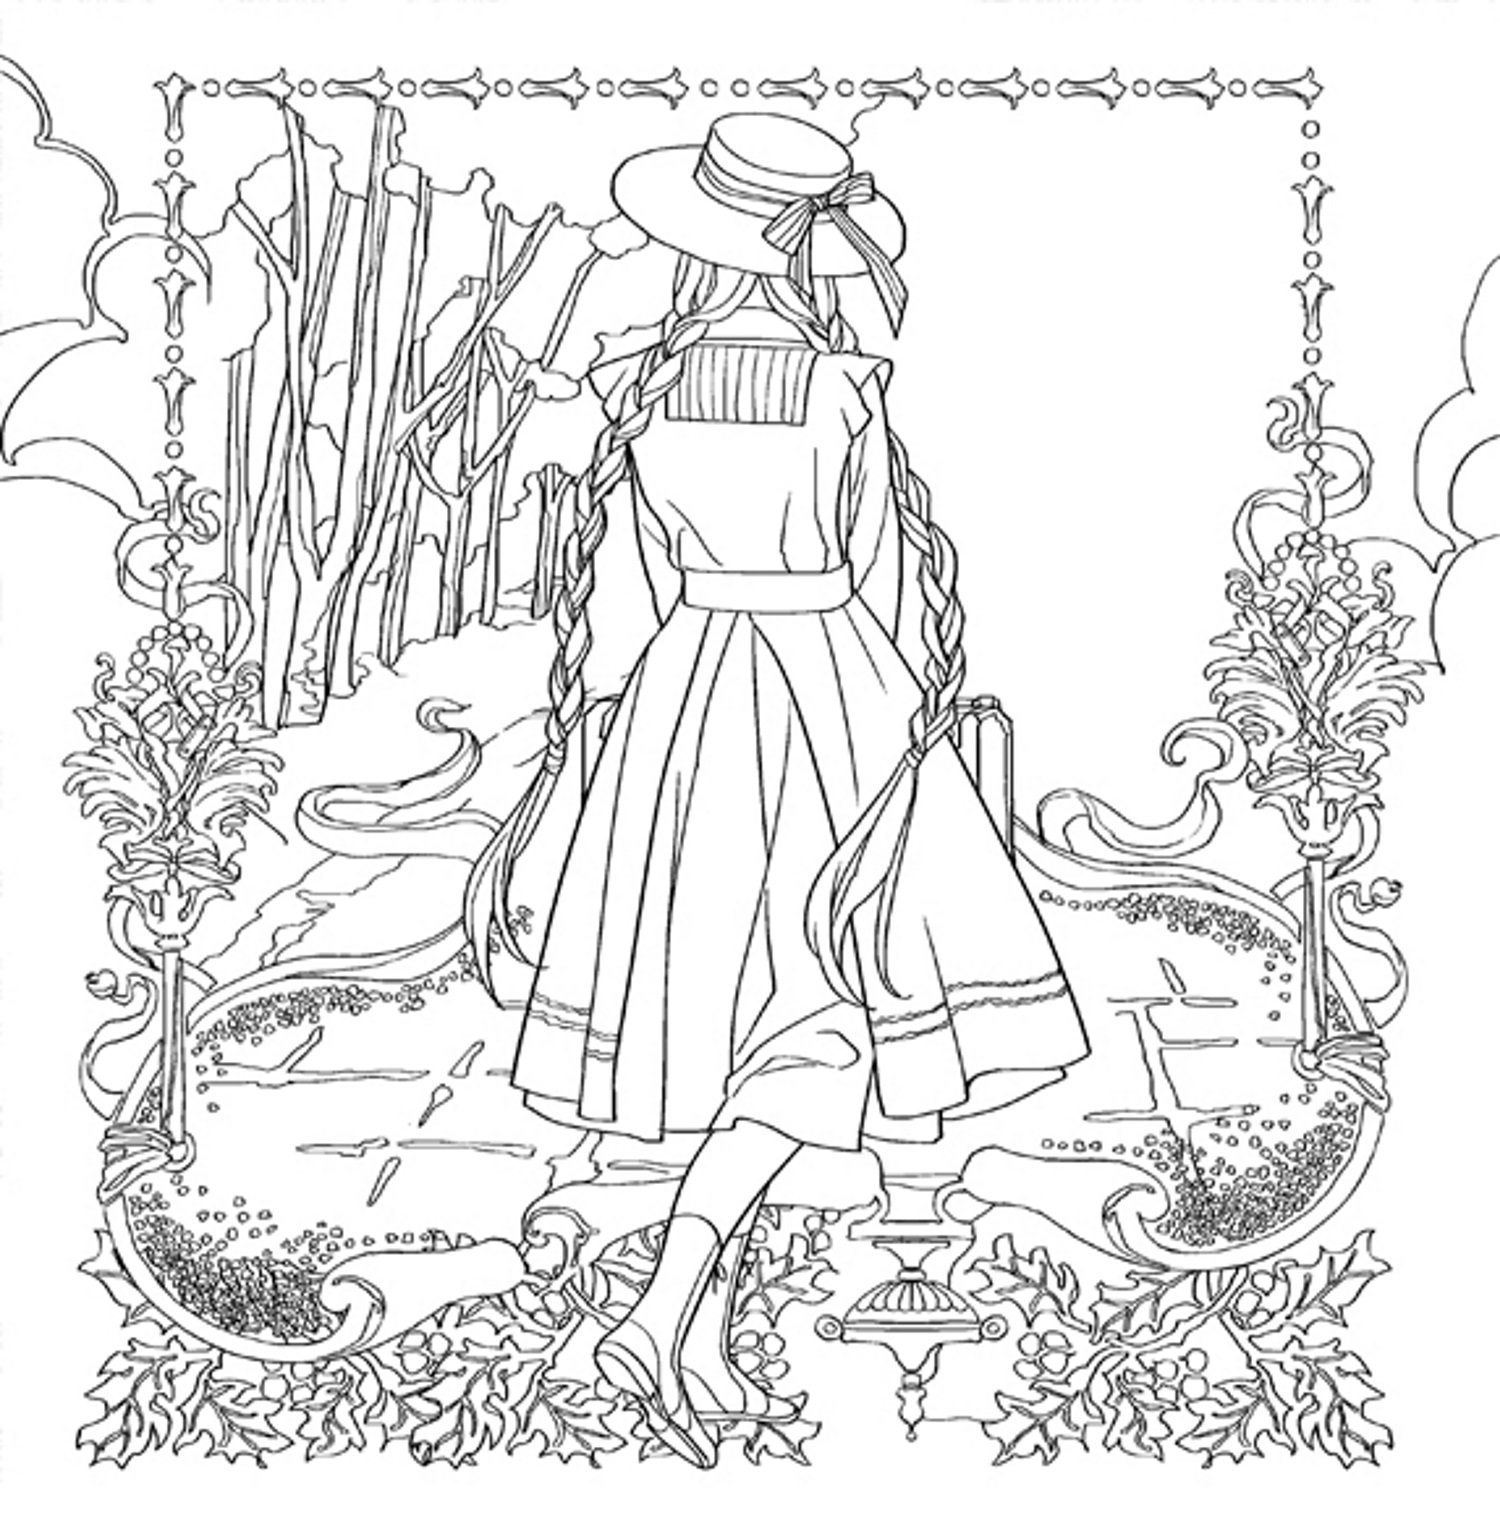 Ann of Green Gables Coloring Page